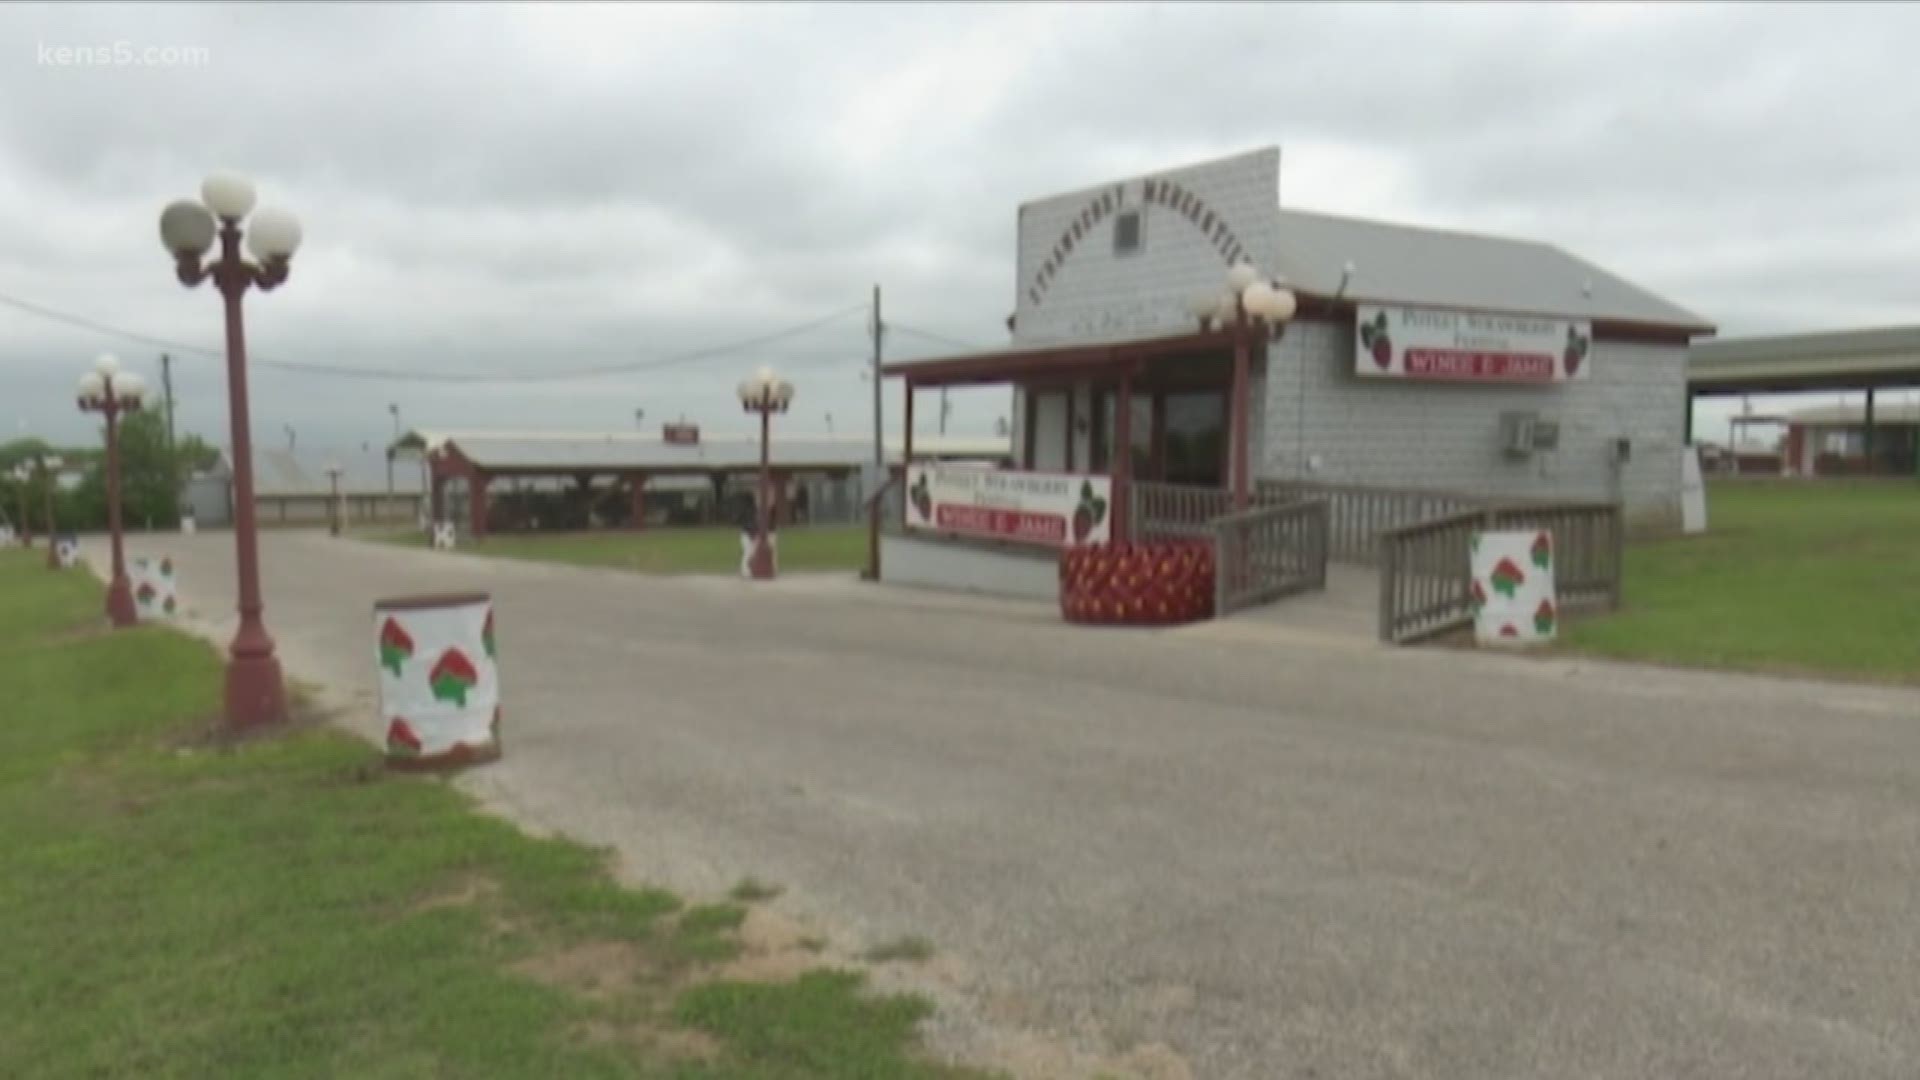 Eyewitness News reporter Aaron Wright went to the strawberry capital of Texas to verify whether or not a shortage has hurt the supply.